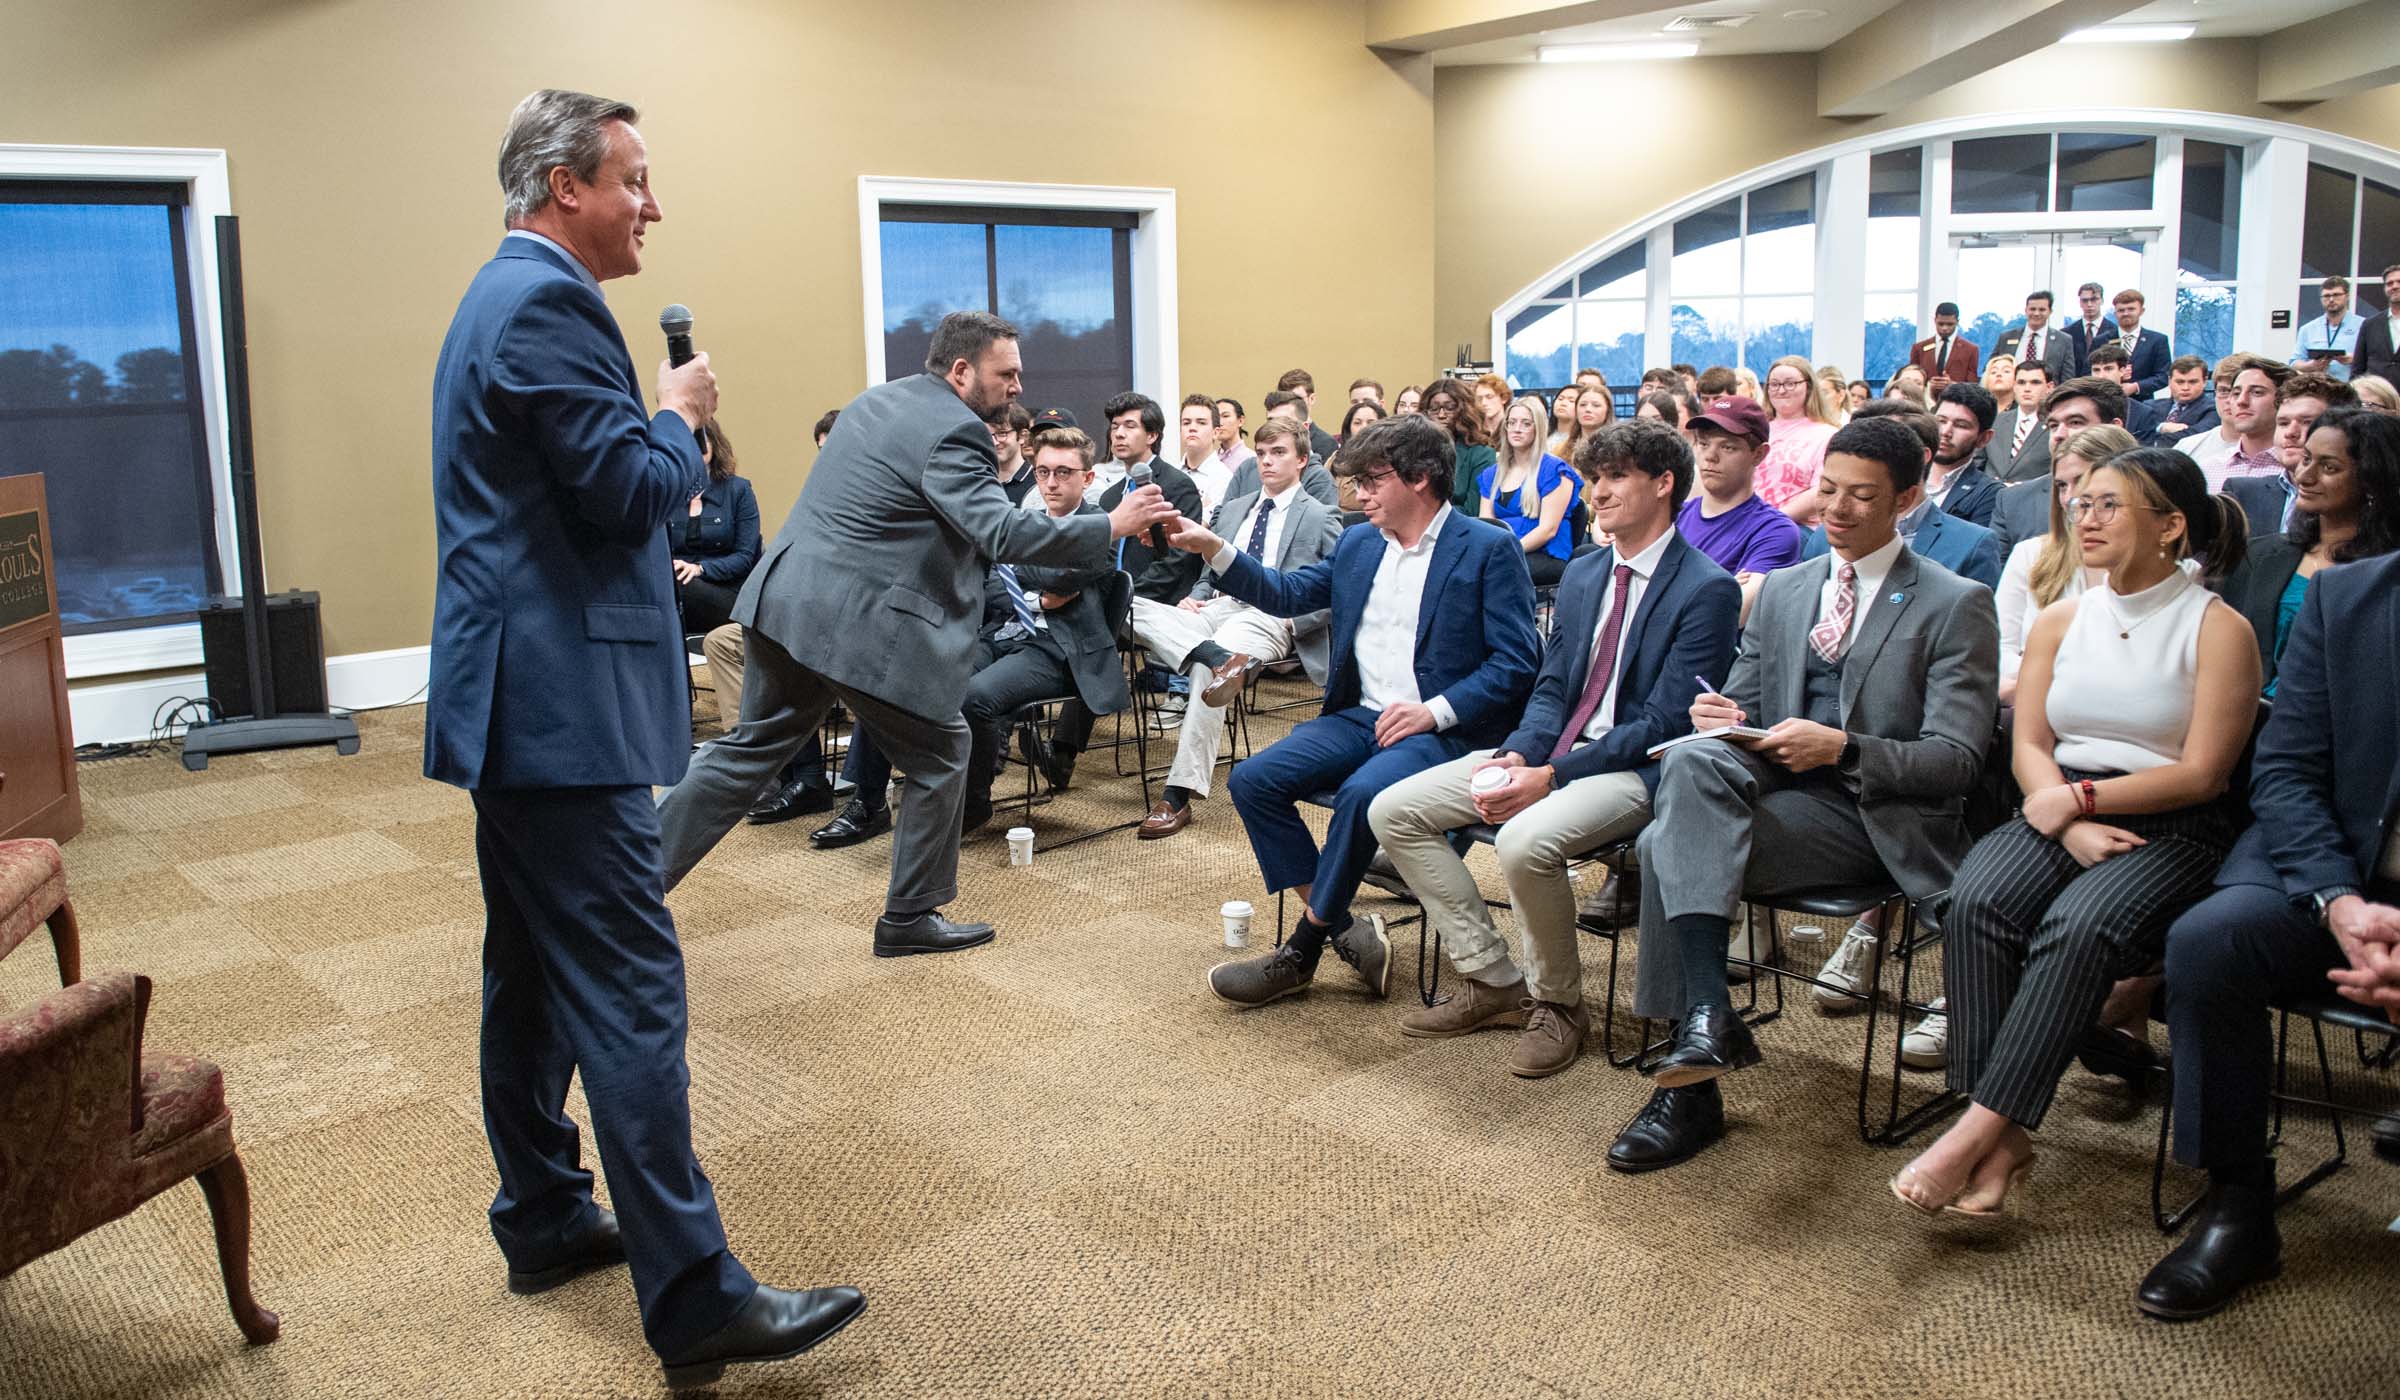 David Cameron stands with a micropone, talking to a full room of honors students in the Griffis Forum Room.